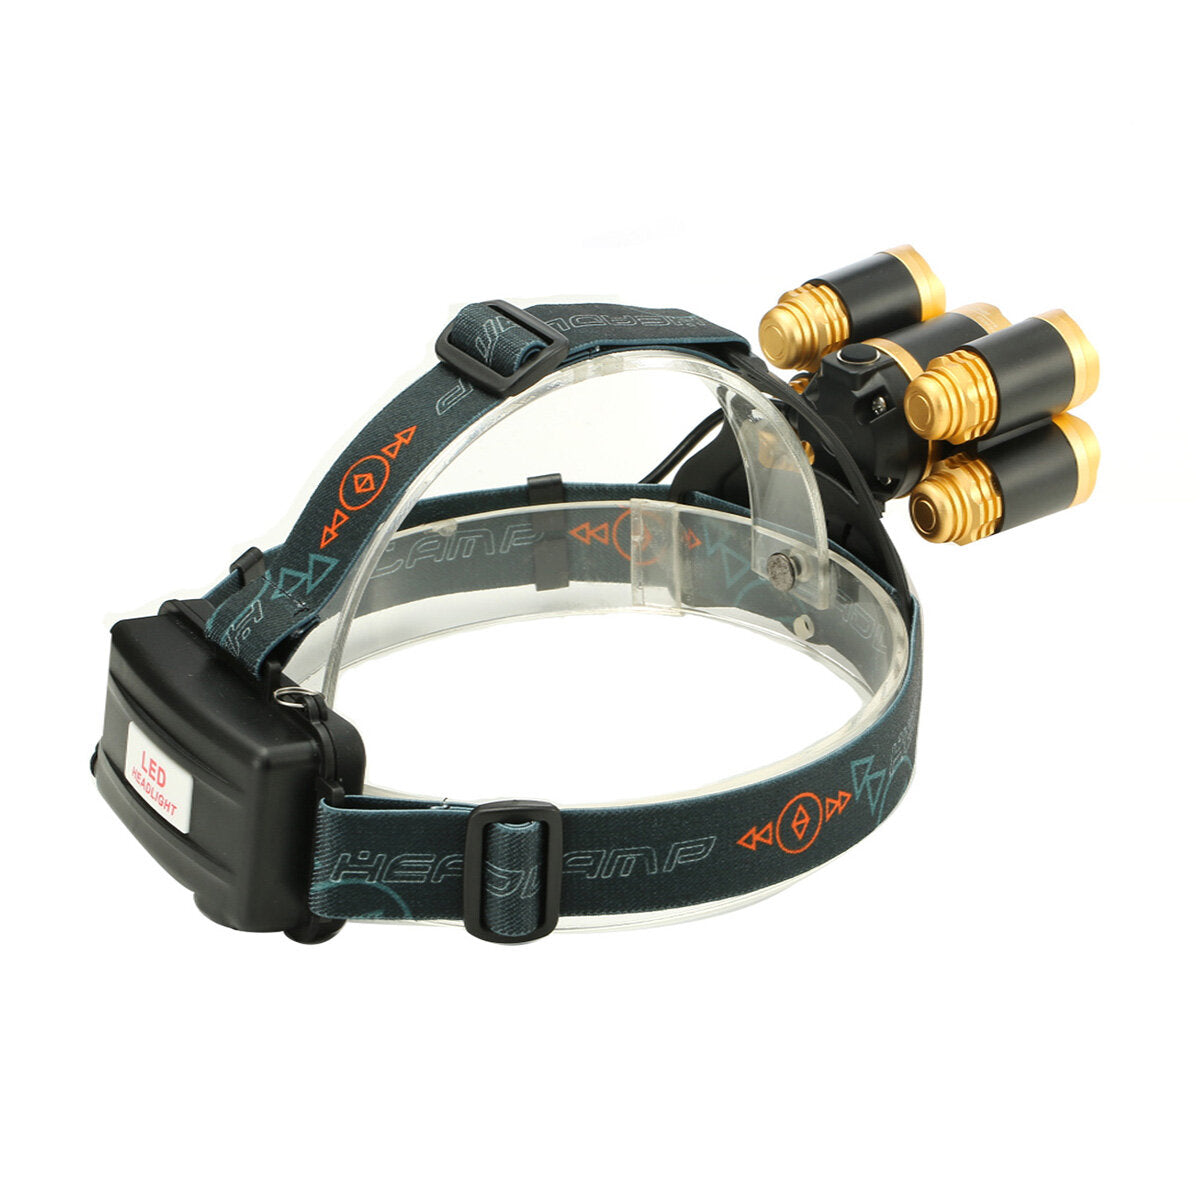 8000LM Cycling Headlamp LED Lamp Beads Super Bright Rechargeable Outdoor Cycling Climbing Headlamp